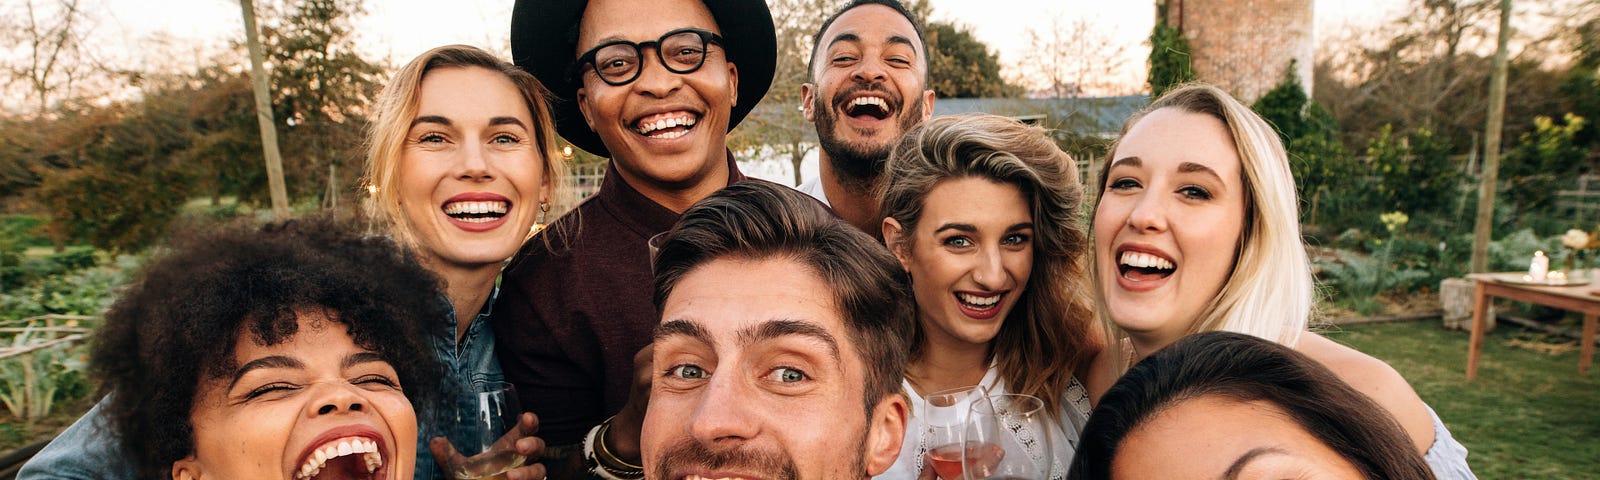 A group of 8 friends, a mix of races and genders, are gathered around a central figure who is holding a camera and taking a selfie. They are all smiling and laughing, clearing having a wonderful time together.